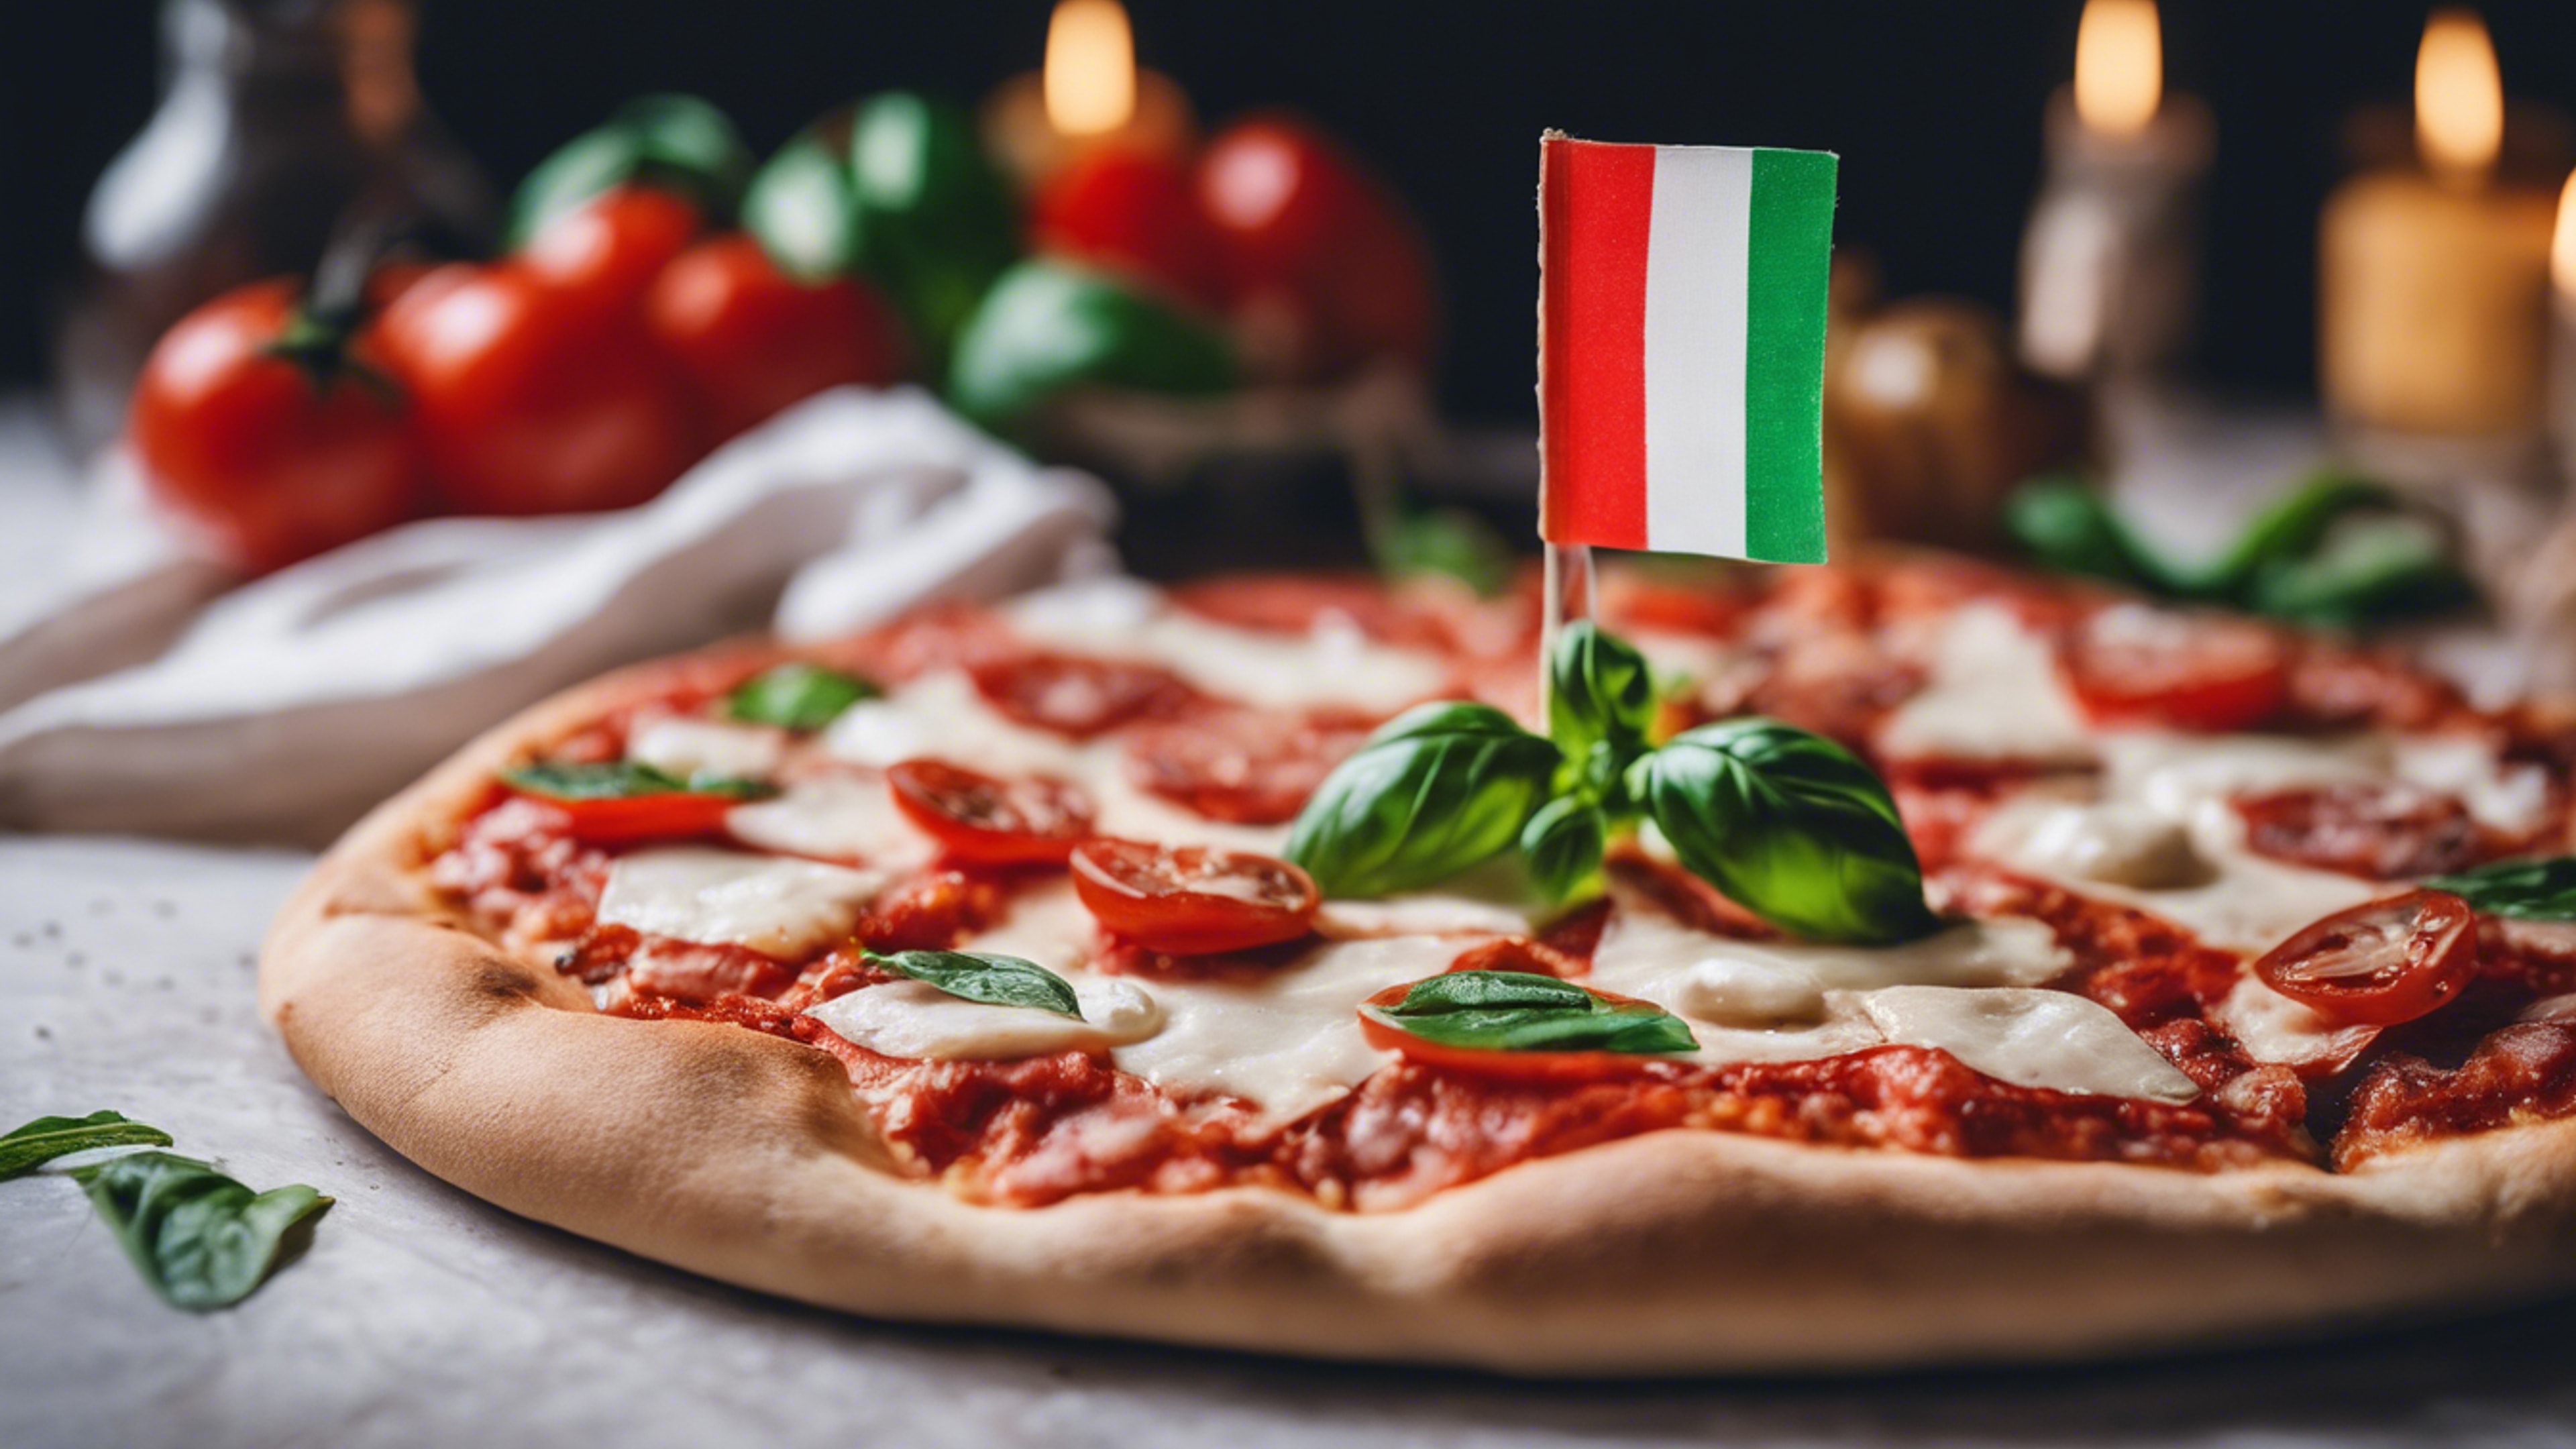 A delectable pizza margherita adorned with the vibrant colors of the Italian flag – green basil, white mozzarella, and red tomatoes. Wallpaper[8d7c128777db467783aa]